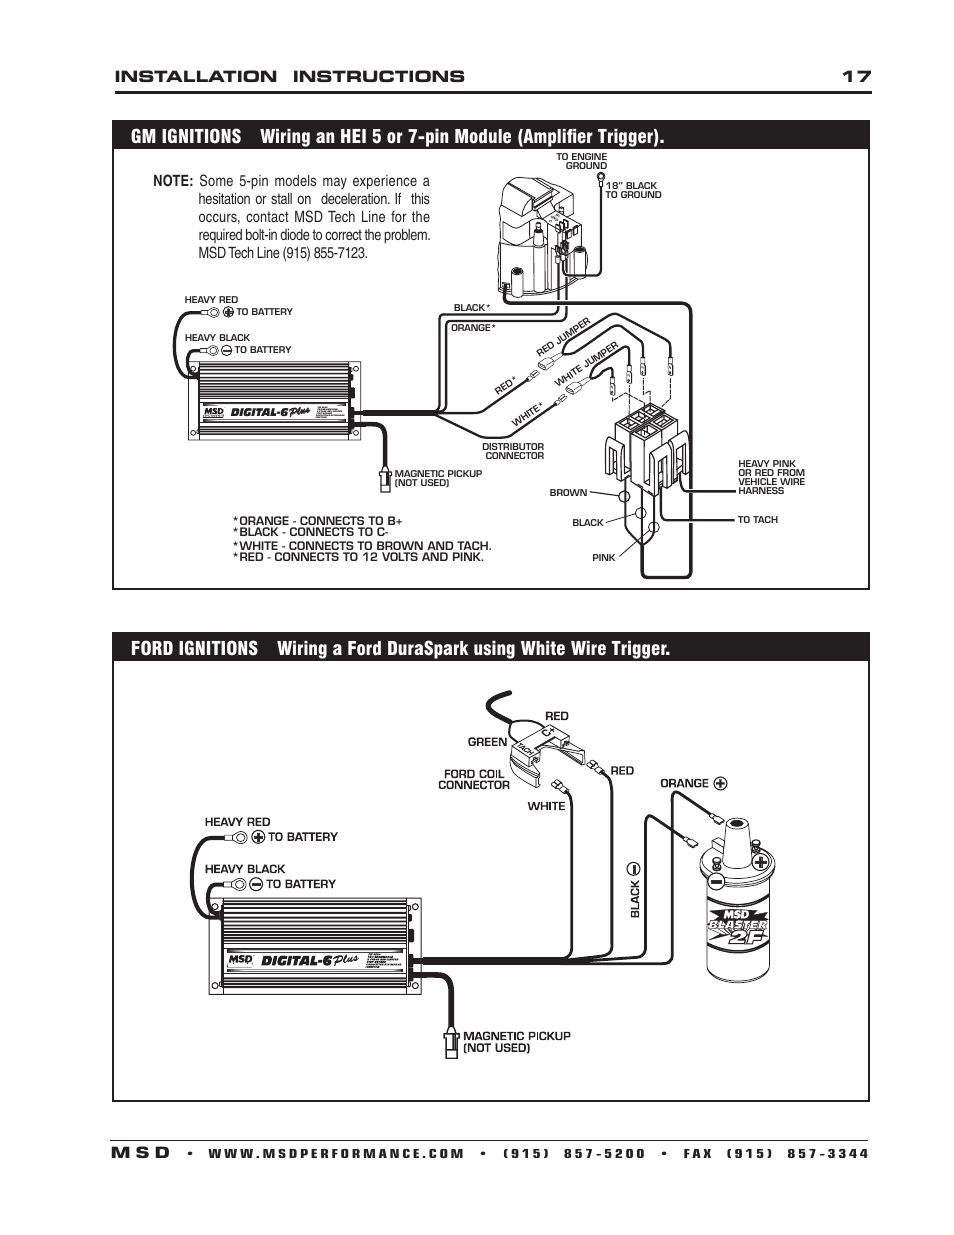 445 Ford Duraspark To Msd Ignition Wiring Diagram Wiring Library